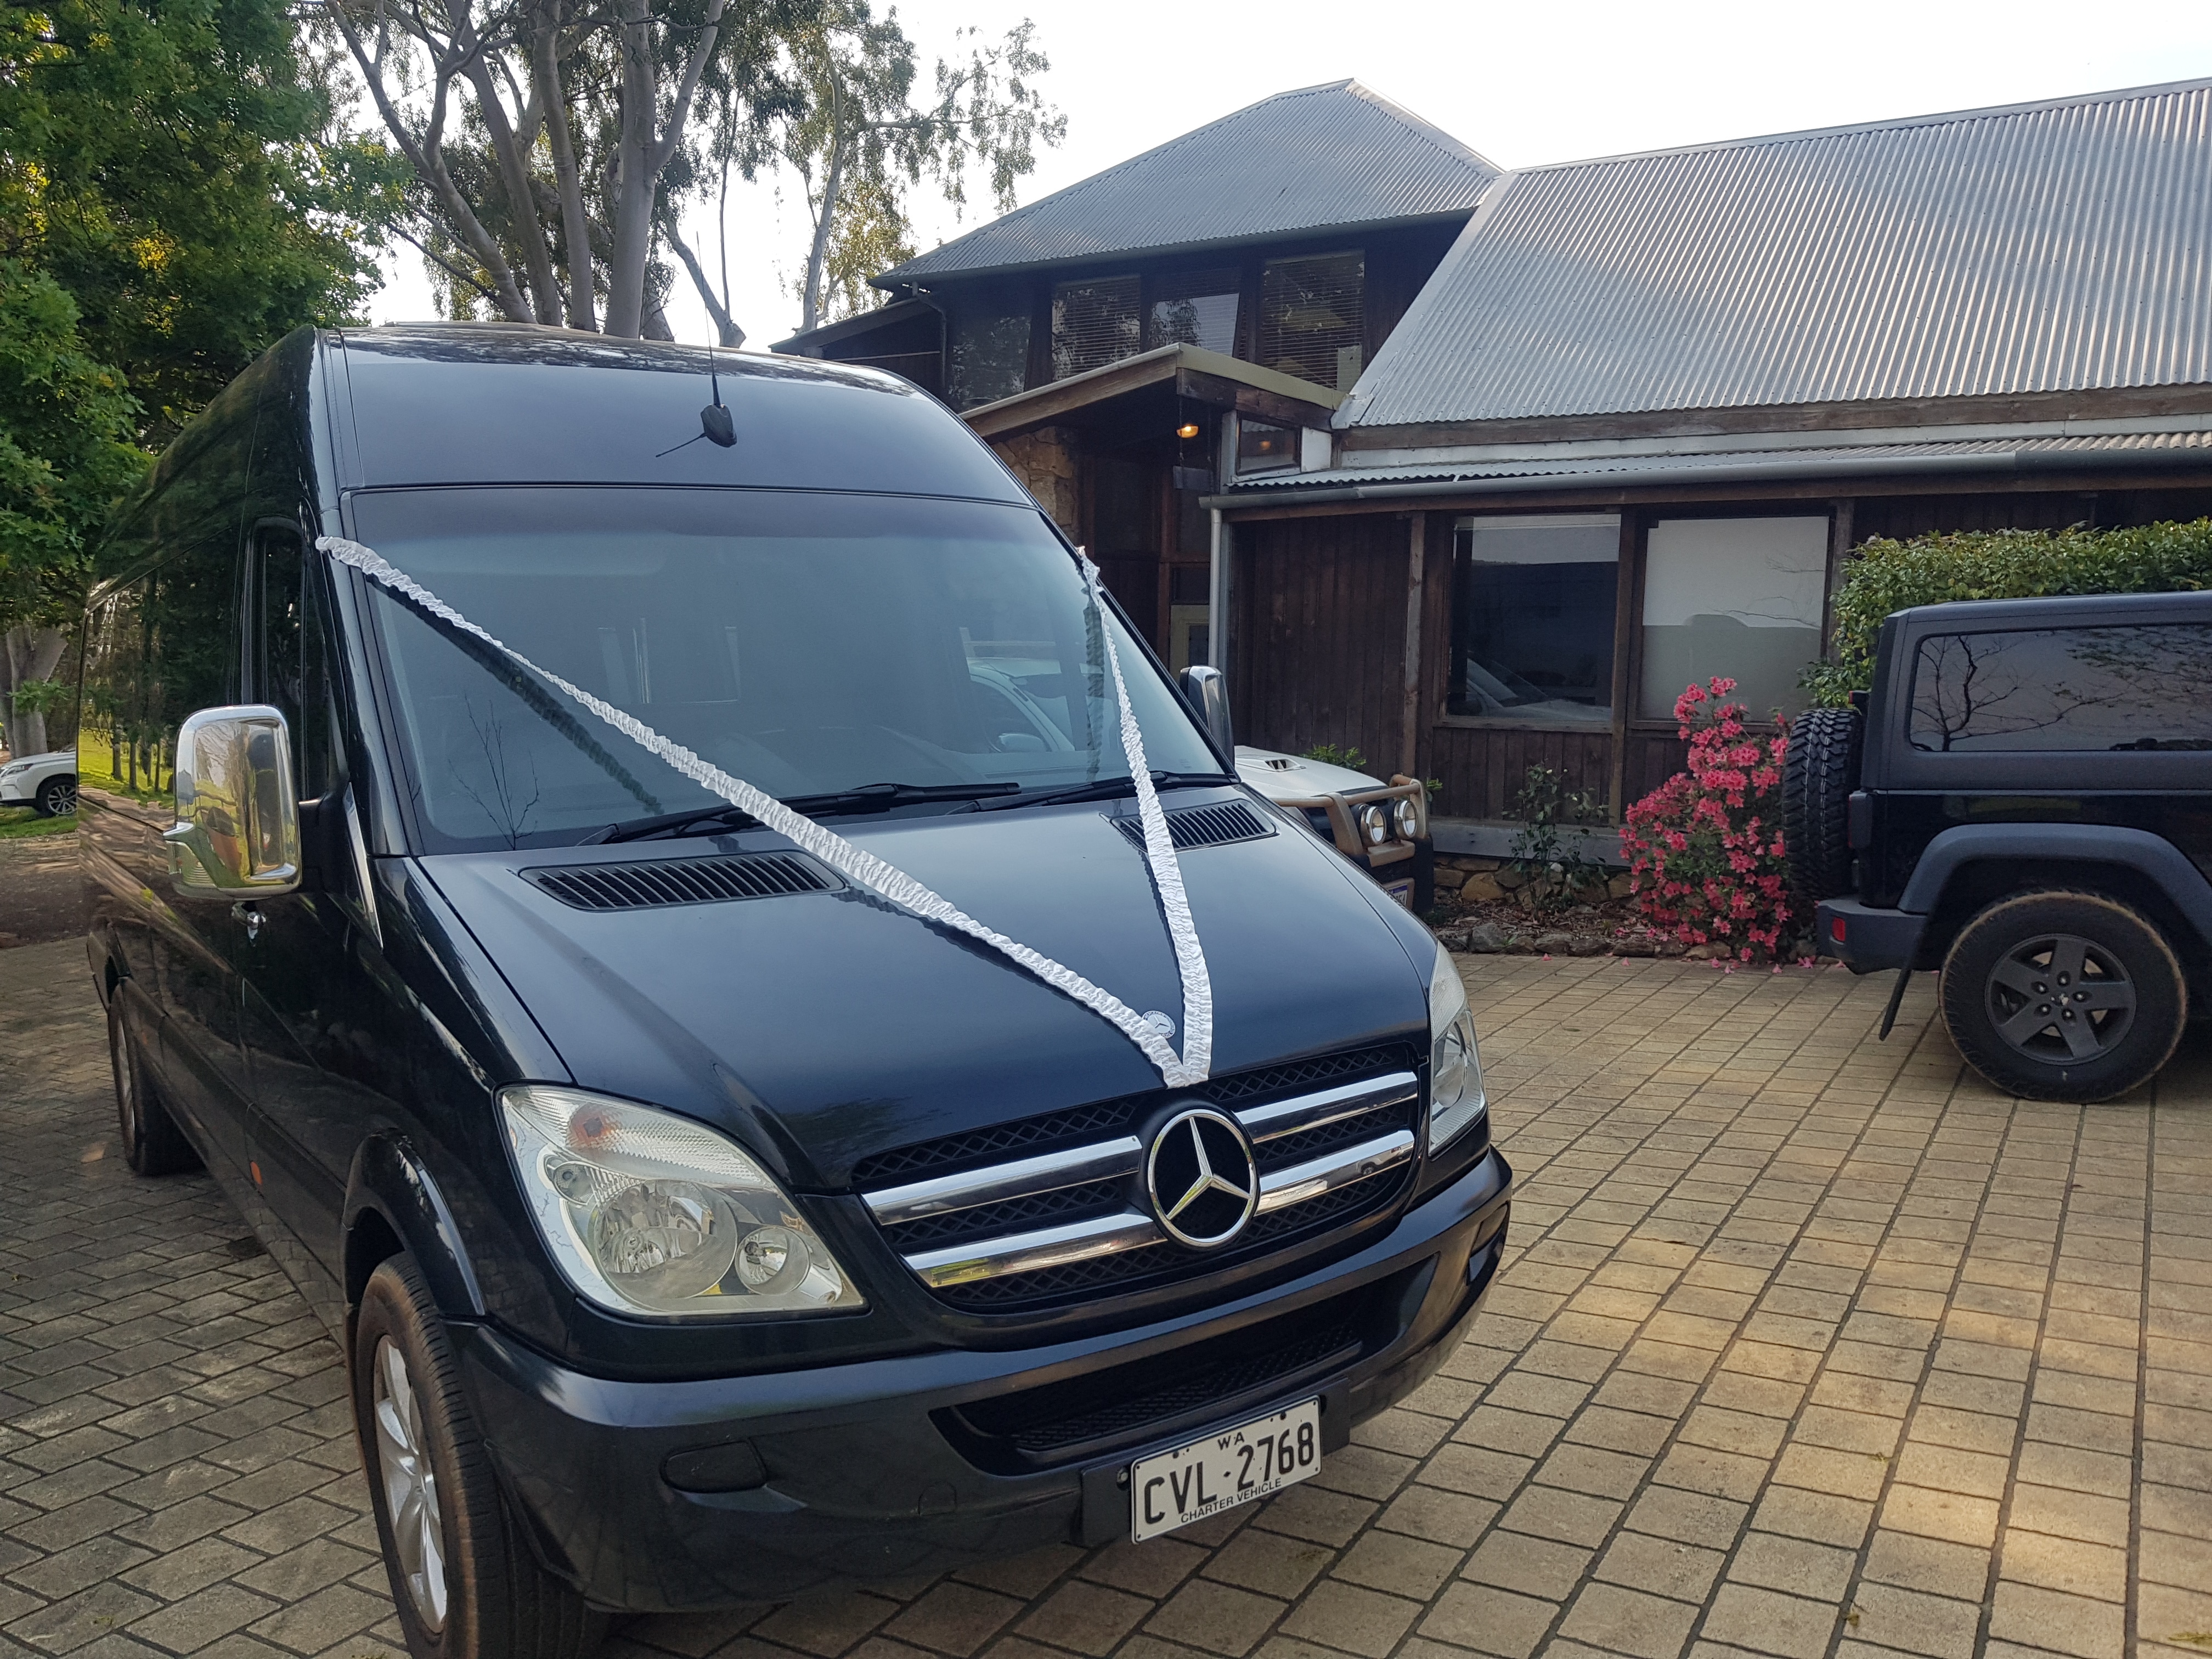 Perth Limousine Services for wine tours, hens night, wedding parties